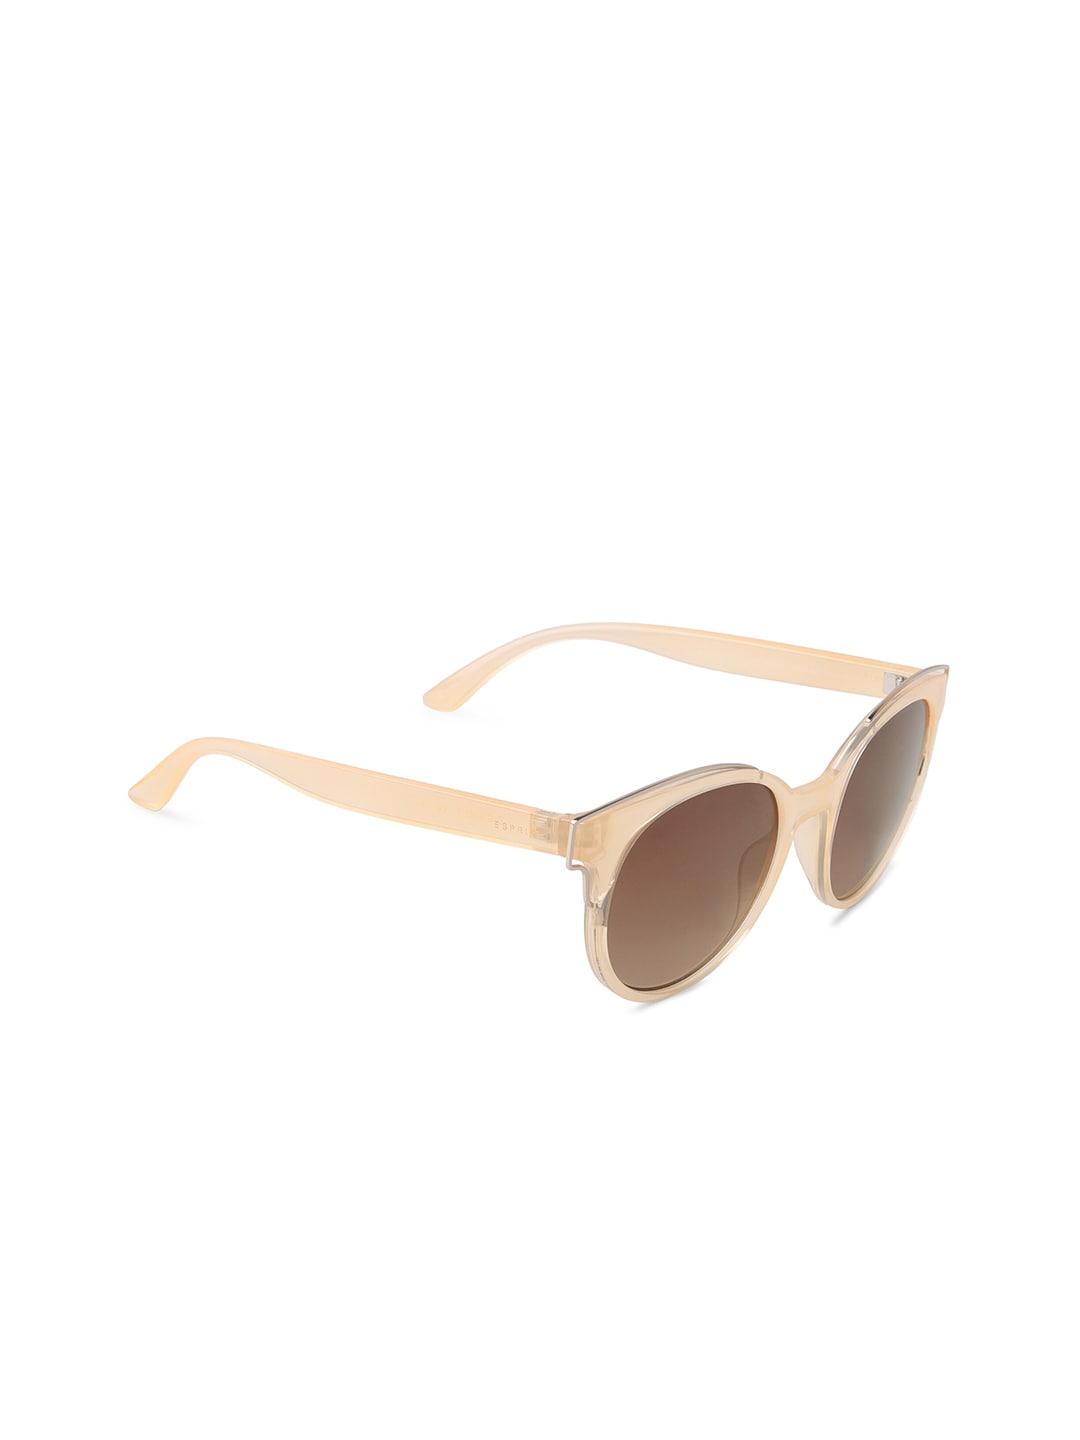 ESPRIT Women Brown Lens & Gold-Toned Sunglasses with UV Protected Lens ET39106-52-565 Price in India